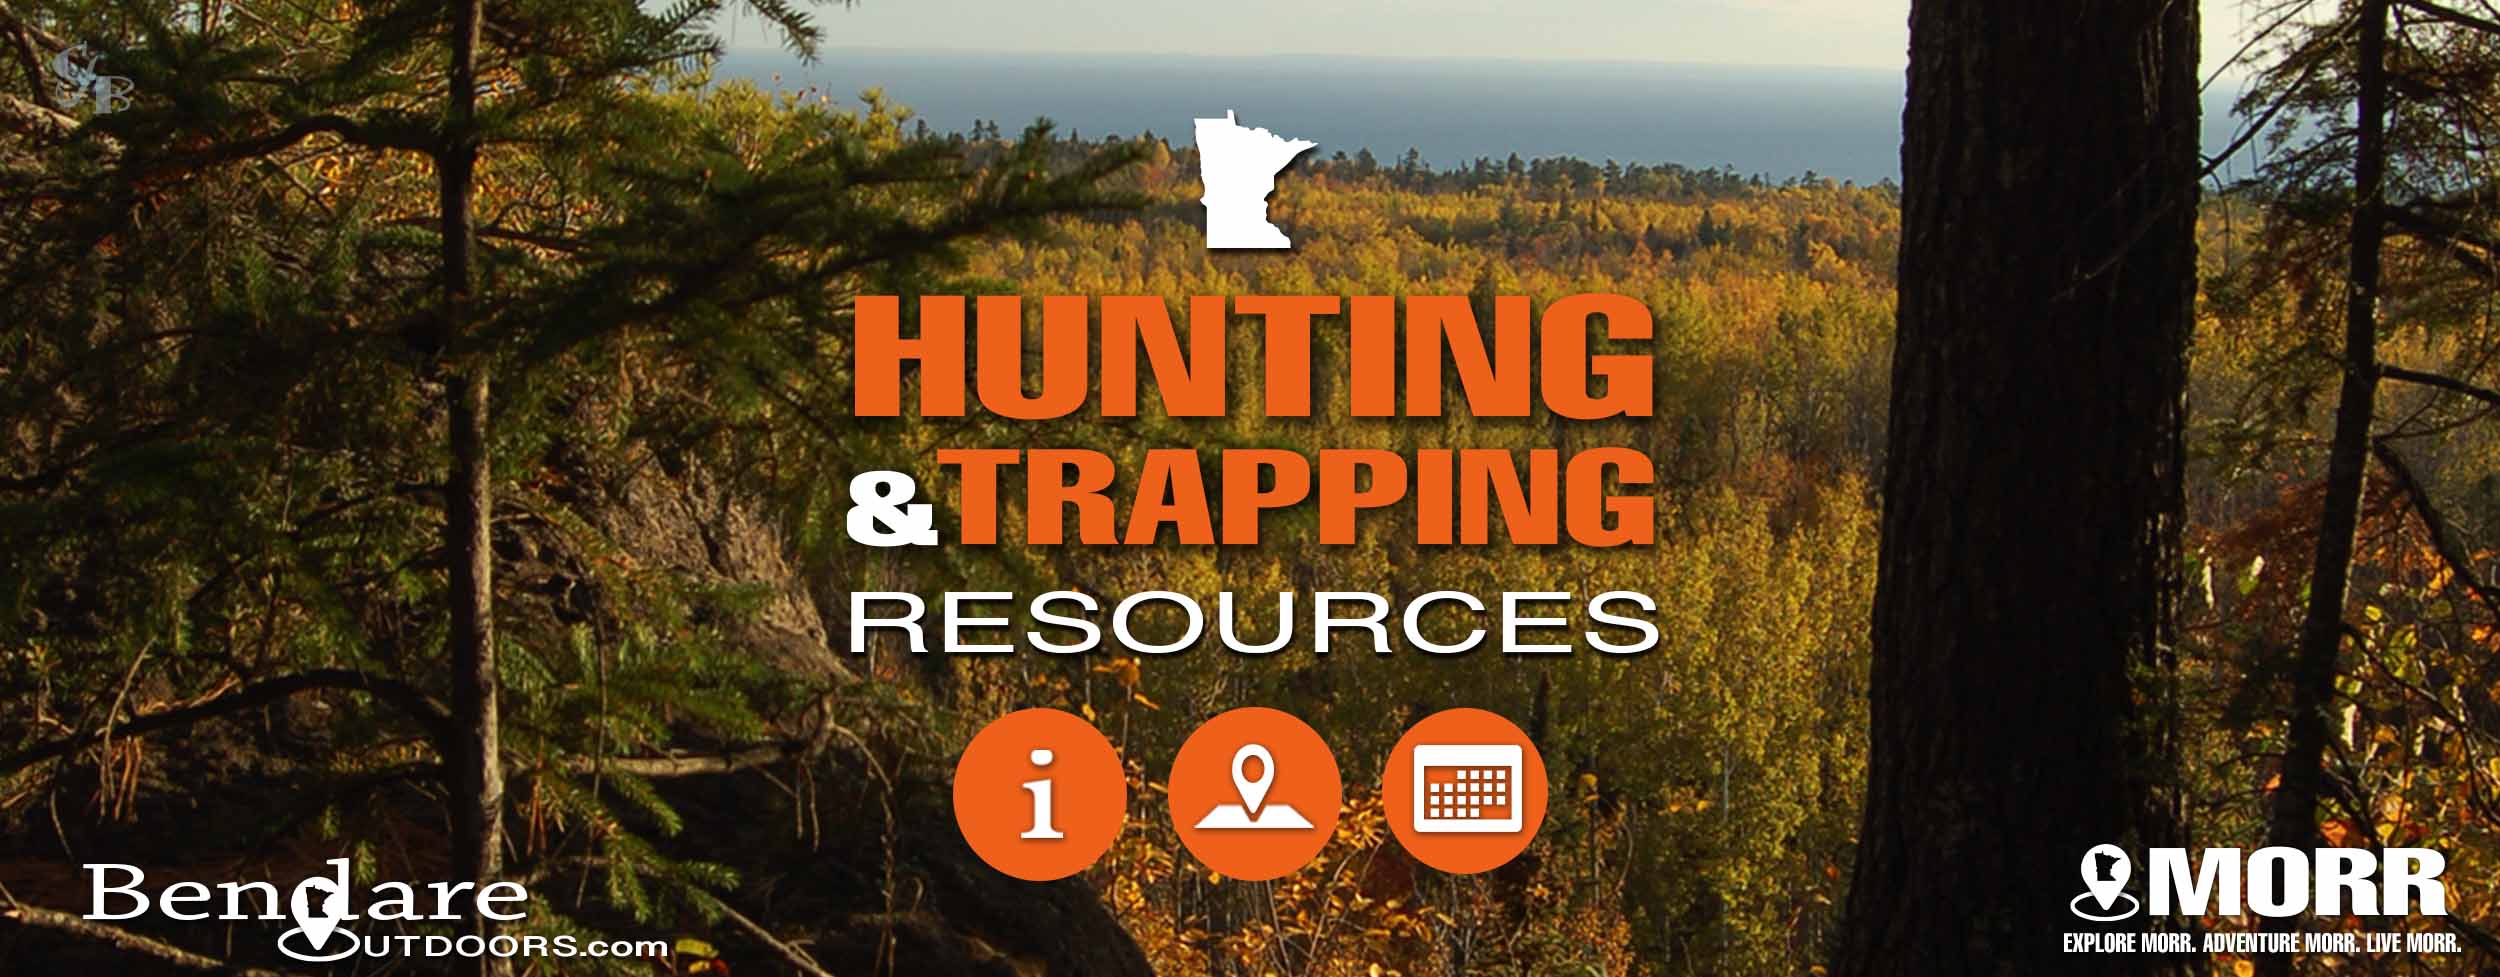 Minnesota Hunting and Trapping Resources